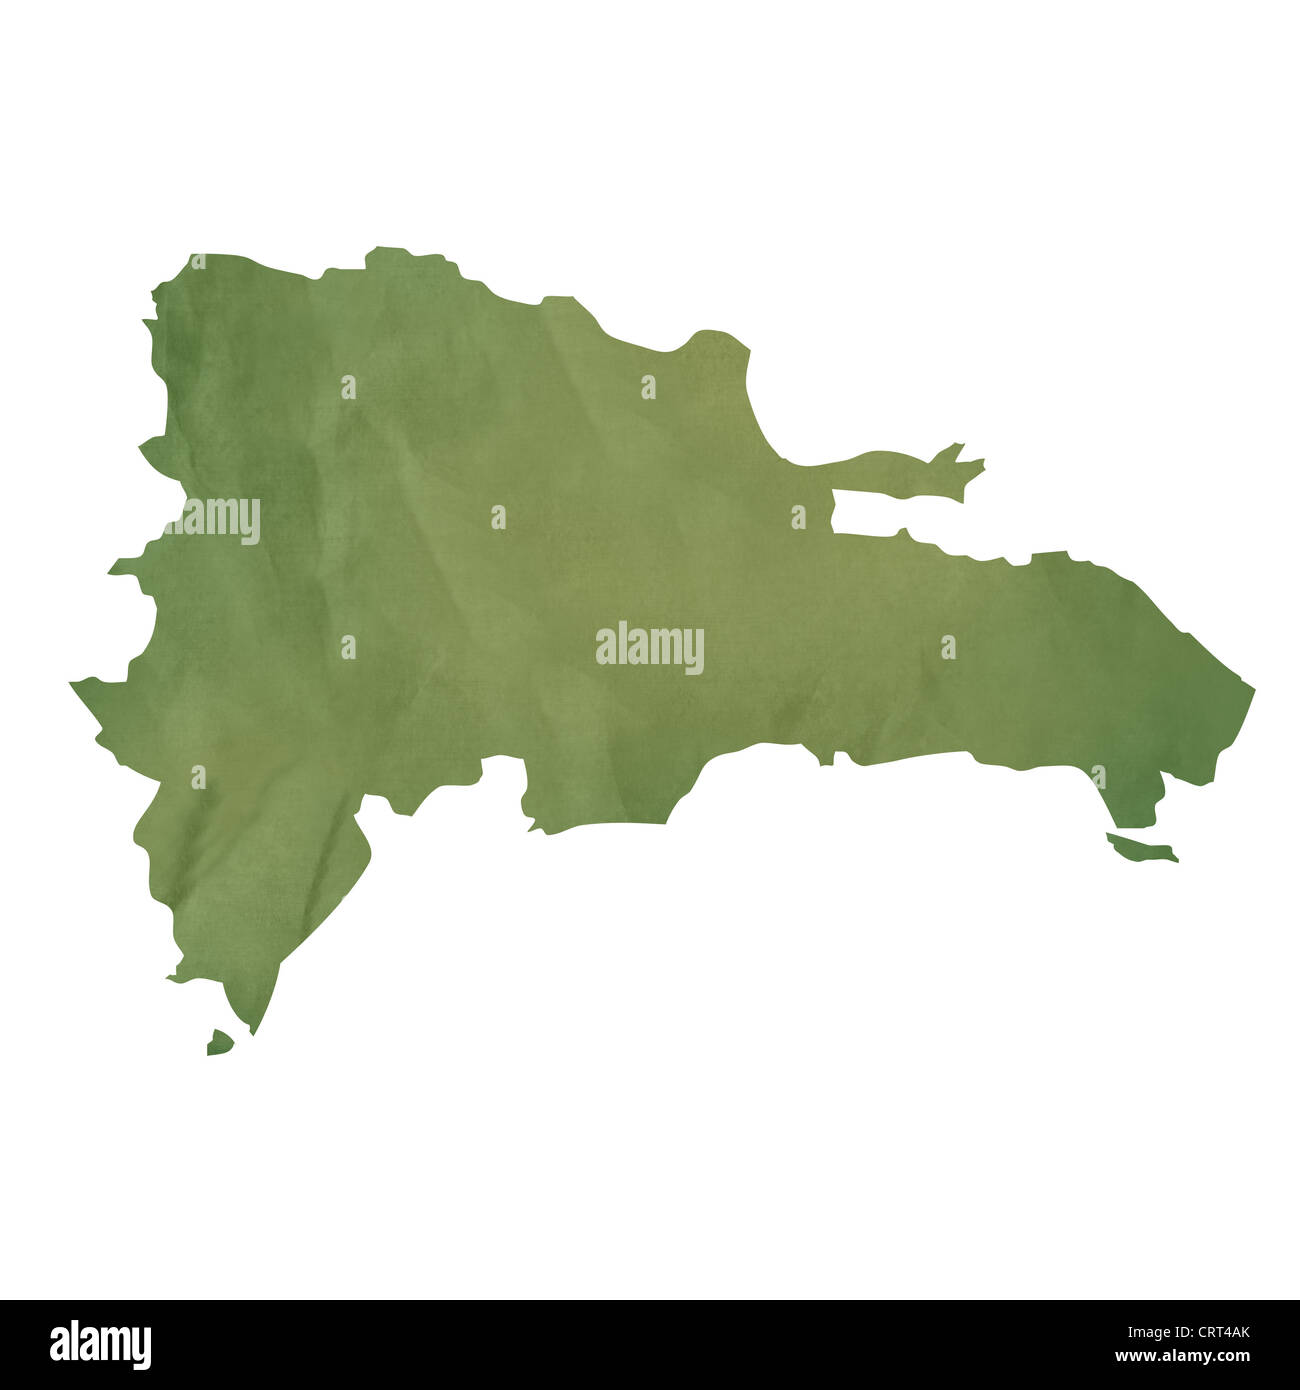 Old green paper map of Dominican Republic isolated on white background Stock Photo